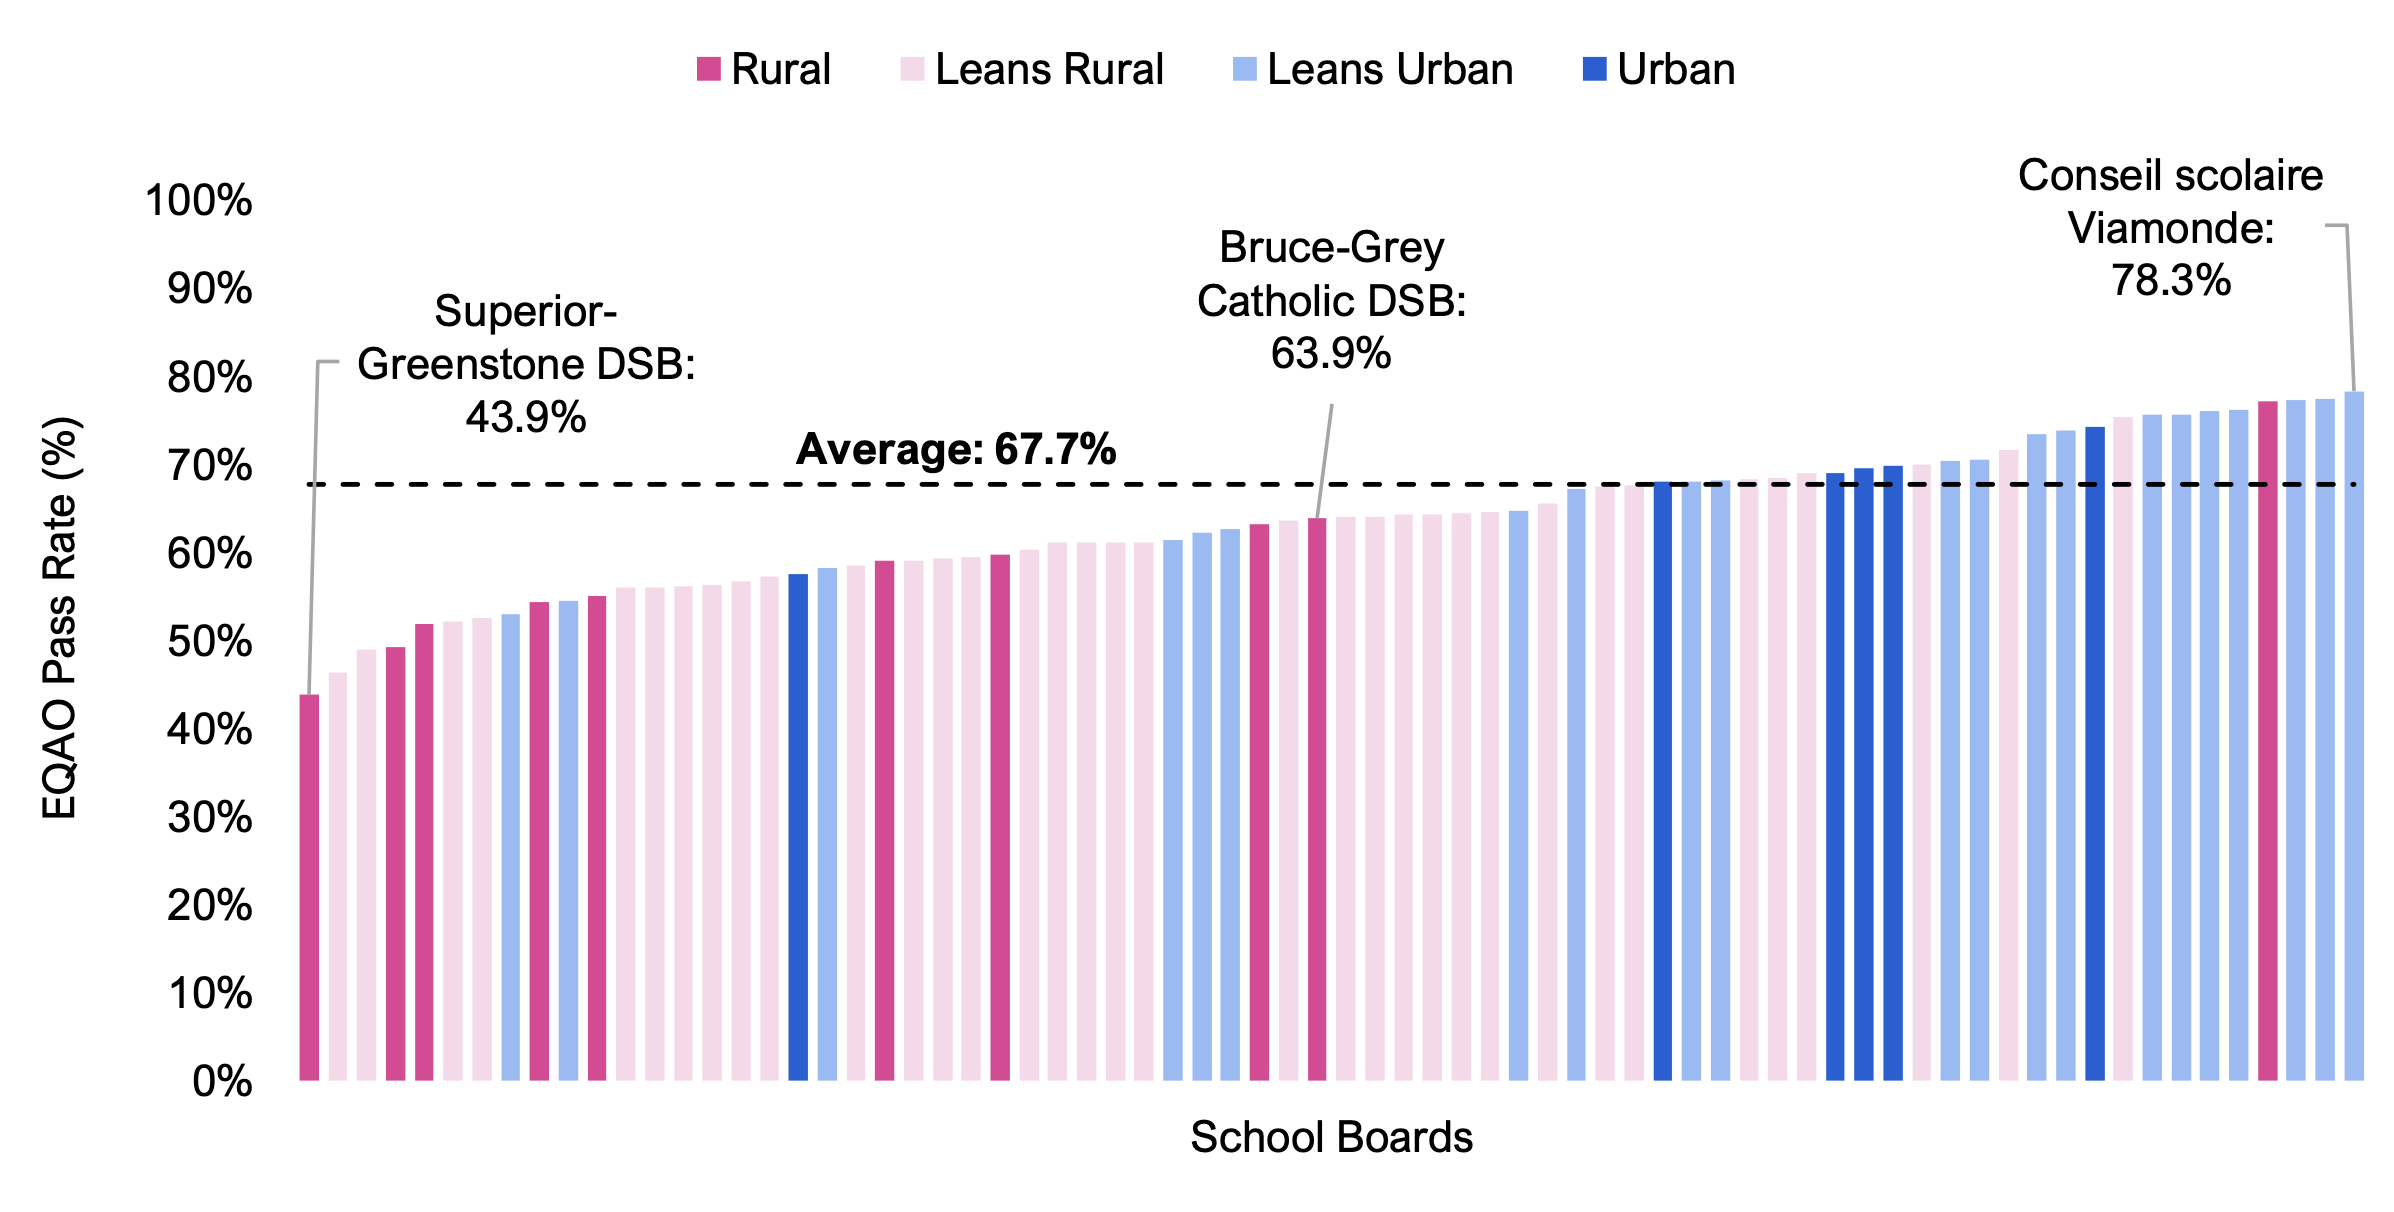 Figure 8.4 shows average EQAO pass rates by school board, broken down by urban factor (rural, leans rural, leans urban, urban). The values range from a low of 43.9 per cent for the Superior-Greenstone DSB to a high of 78.3 per cent for the Conseil scolaire Viamonde. On average, rural and ‘leans rural’ schools had lower average EQAO pass rates than urban and ‘leans urban’ schools.